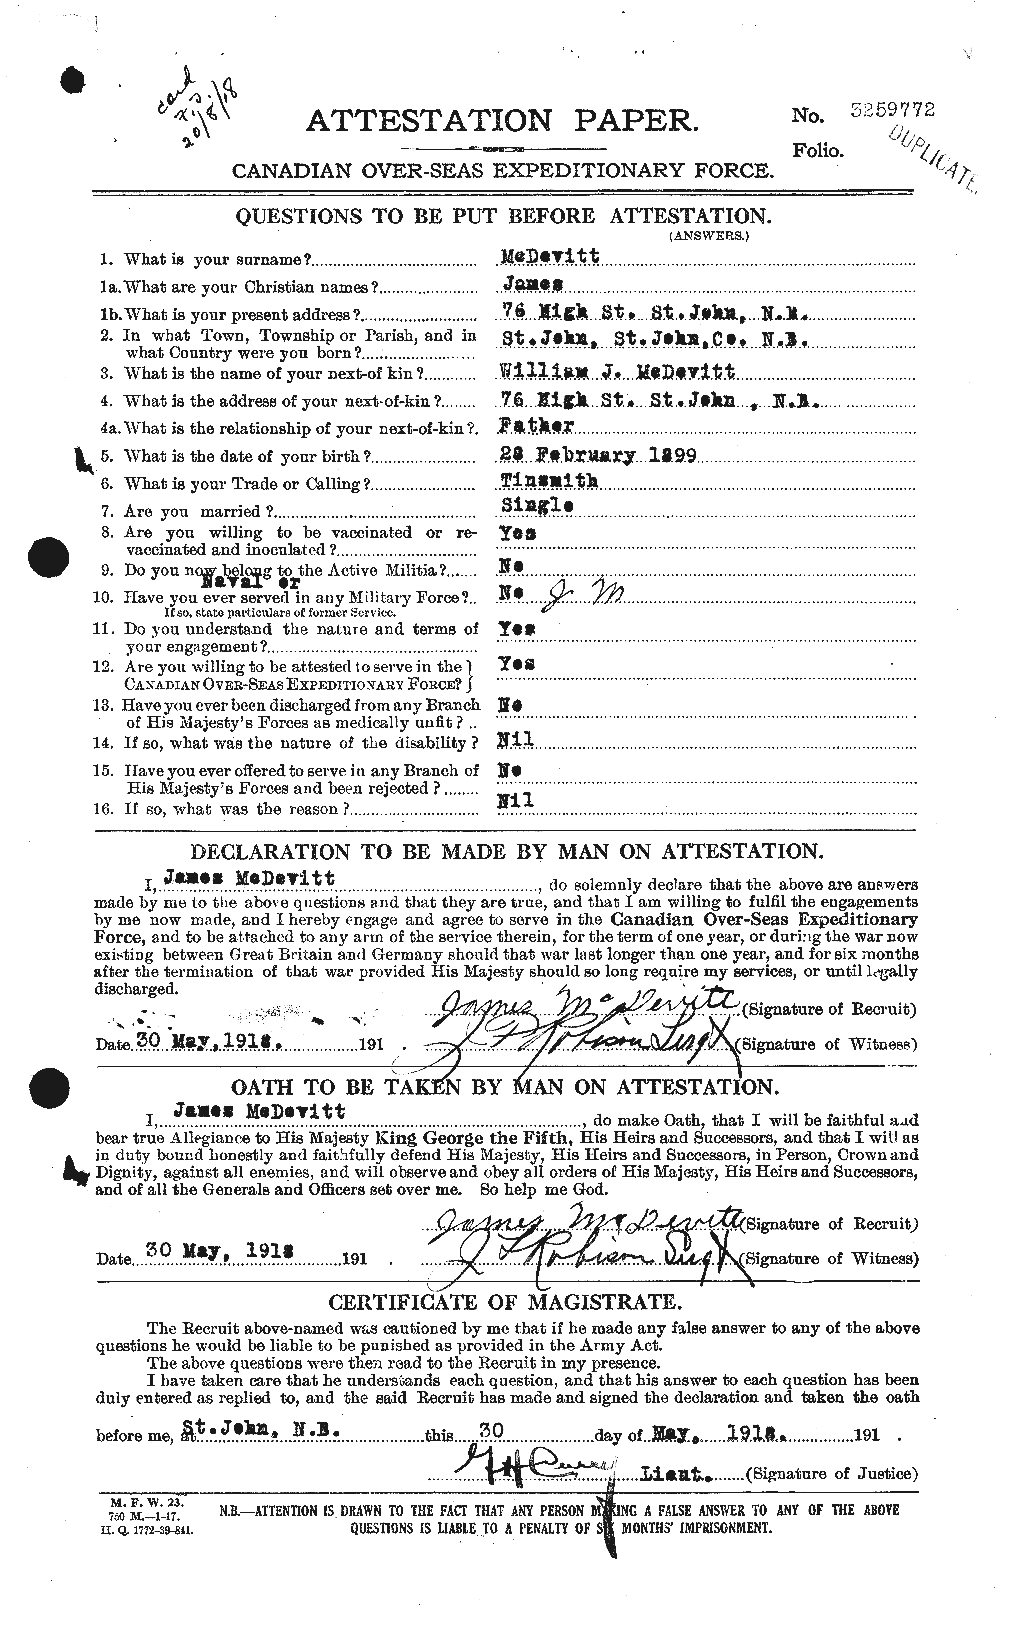 Personnel Records of the First World War - CEF 517117a